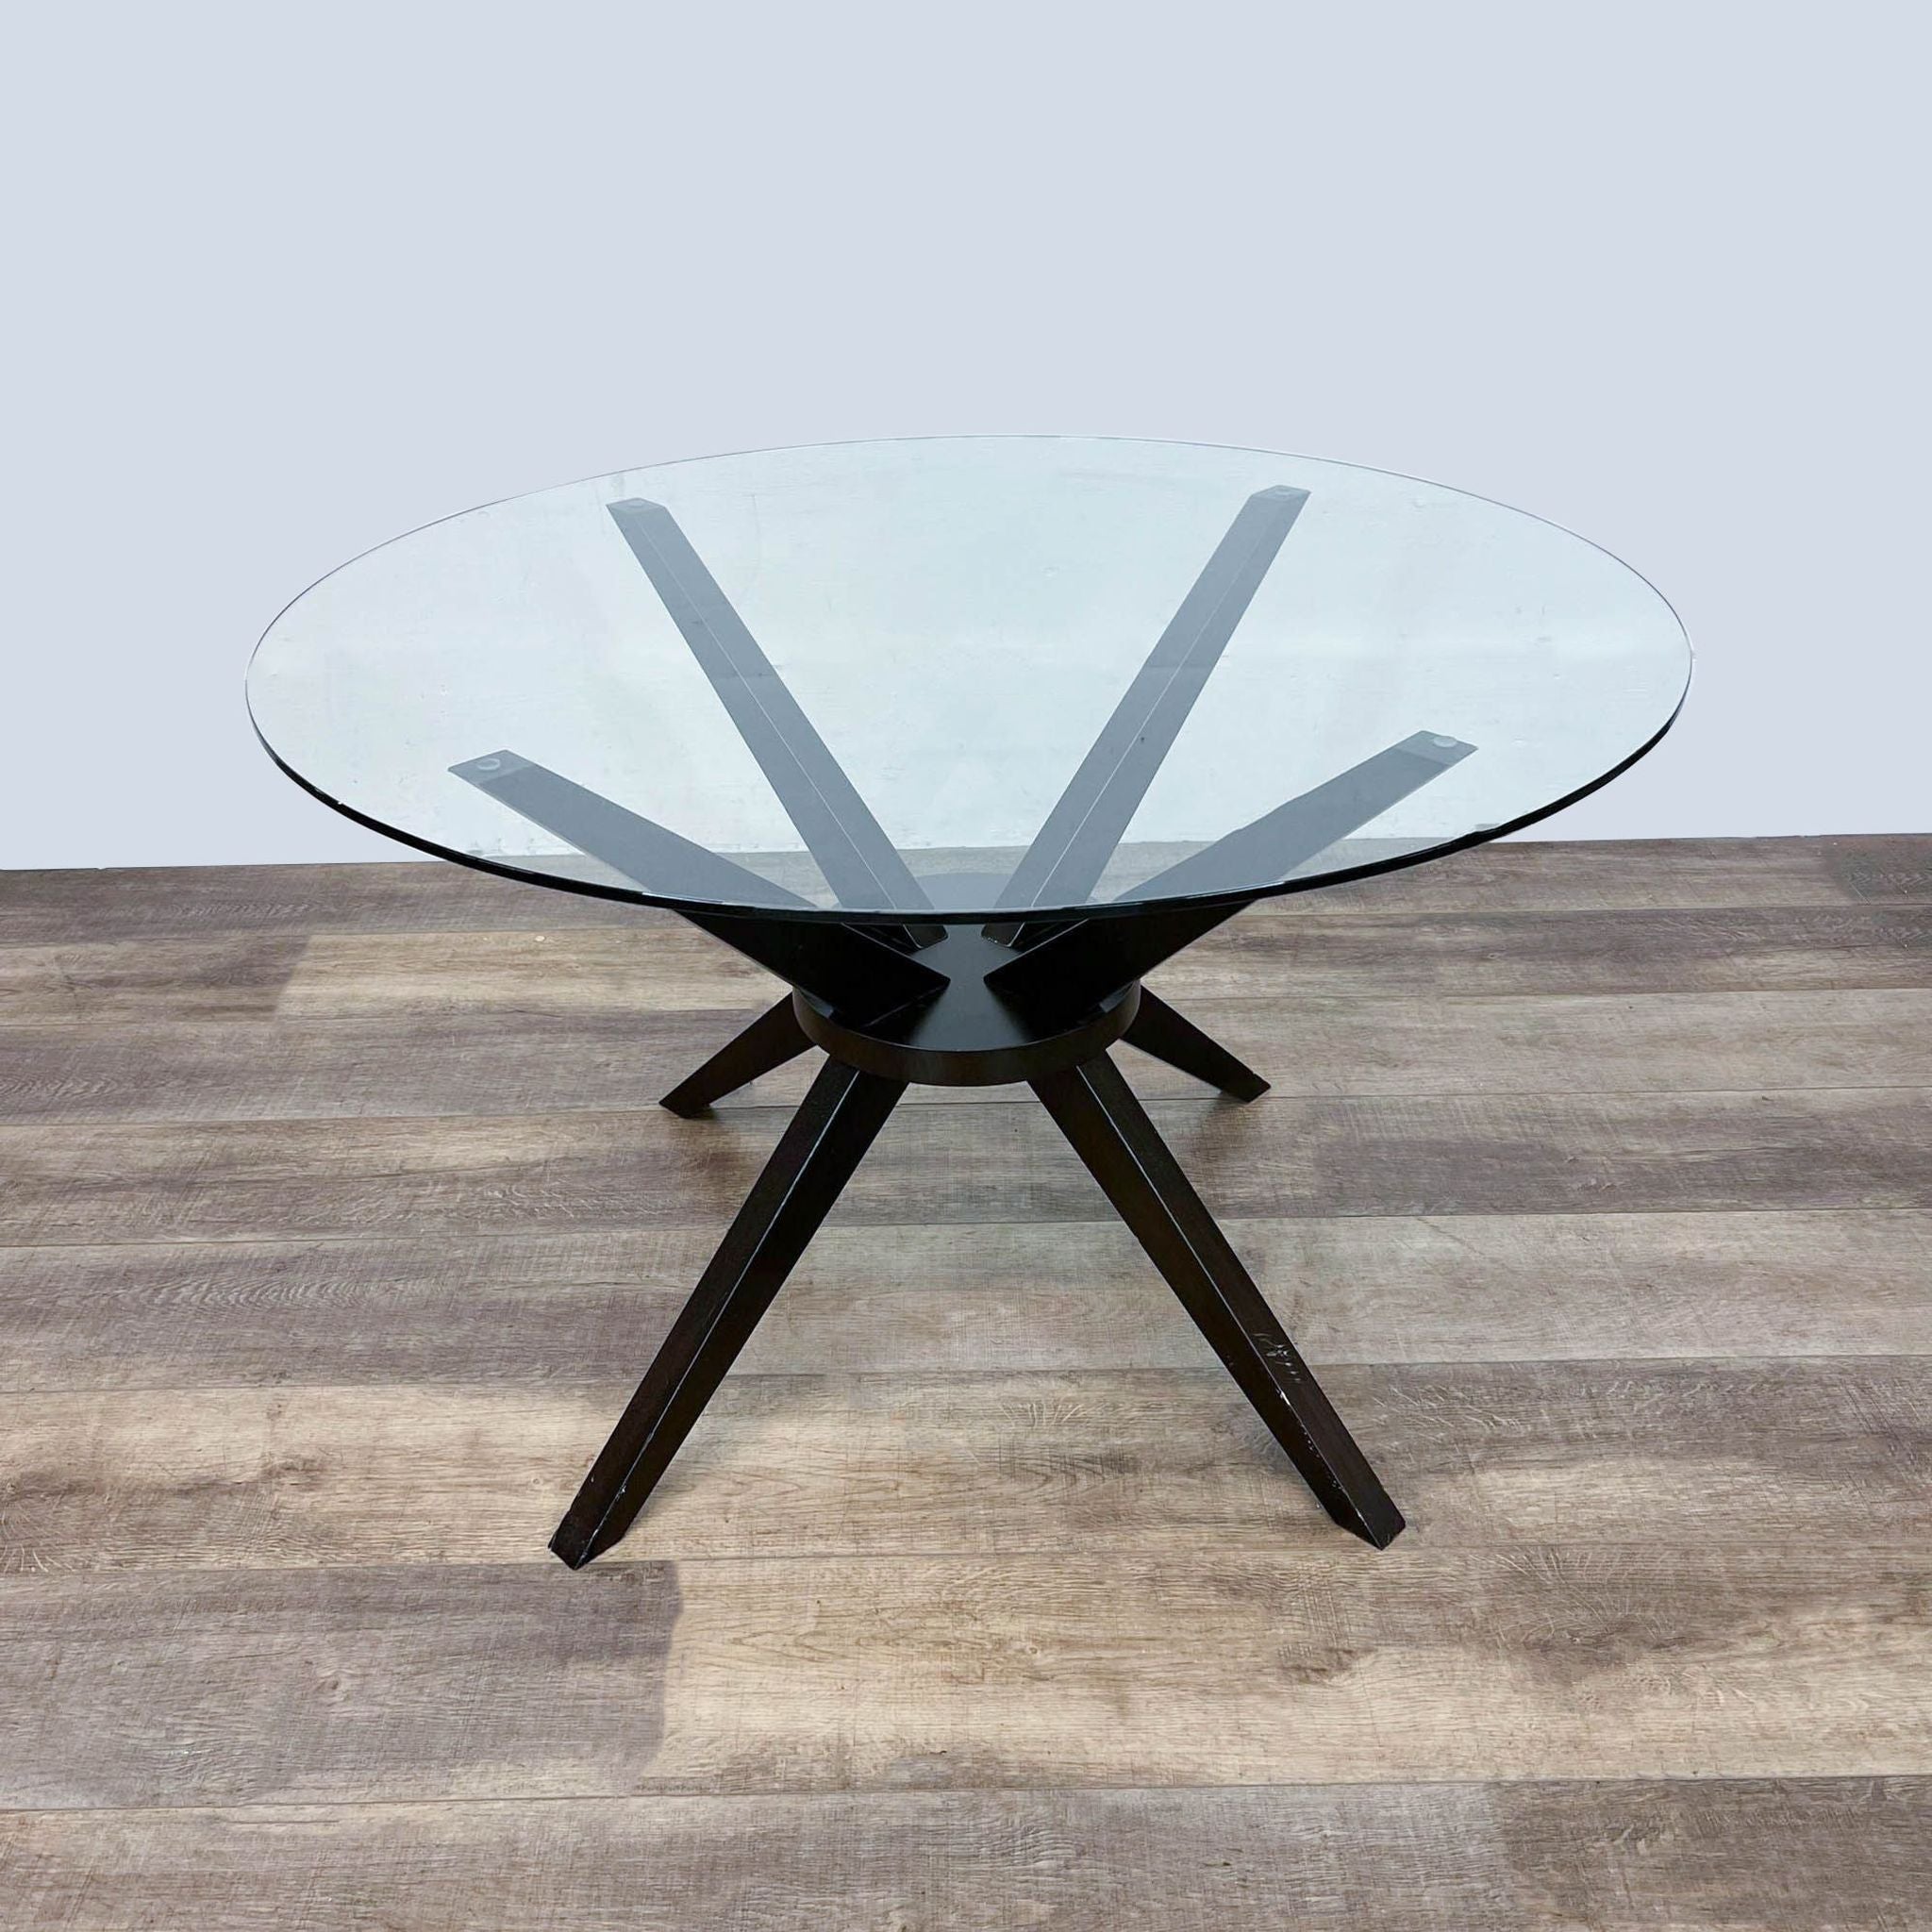 Reperch brand contemporary modern round dining table with angular solid wood dark legs and a clear tempered glass top.